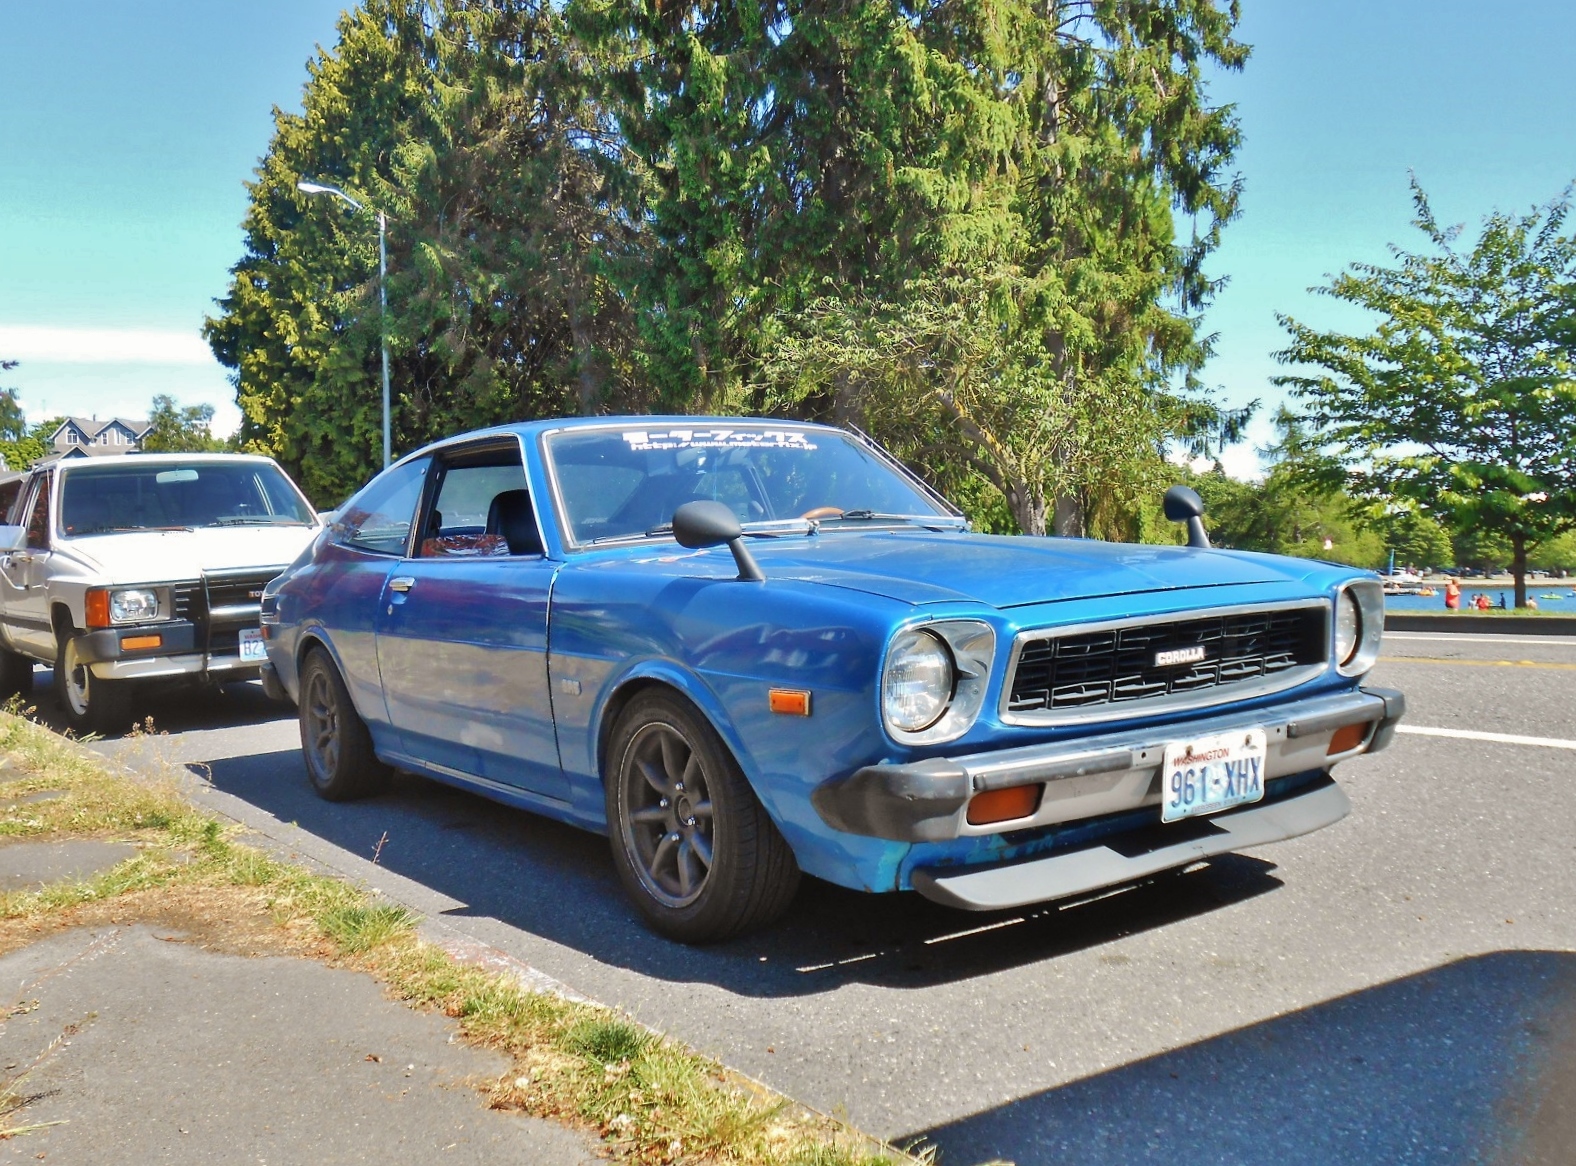 Seattle's Parked Cars: 1977 Toyota Corolla SR5 Sport Coupe